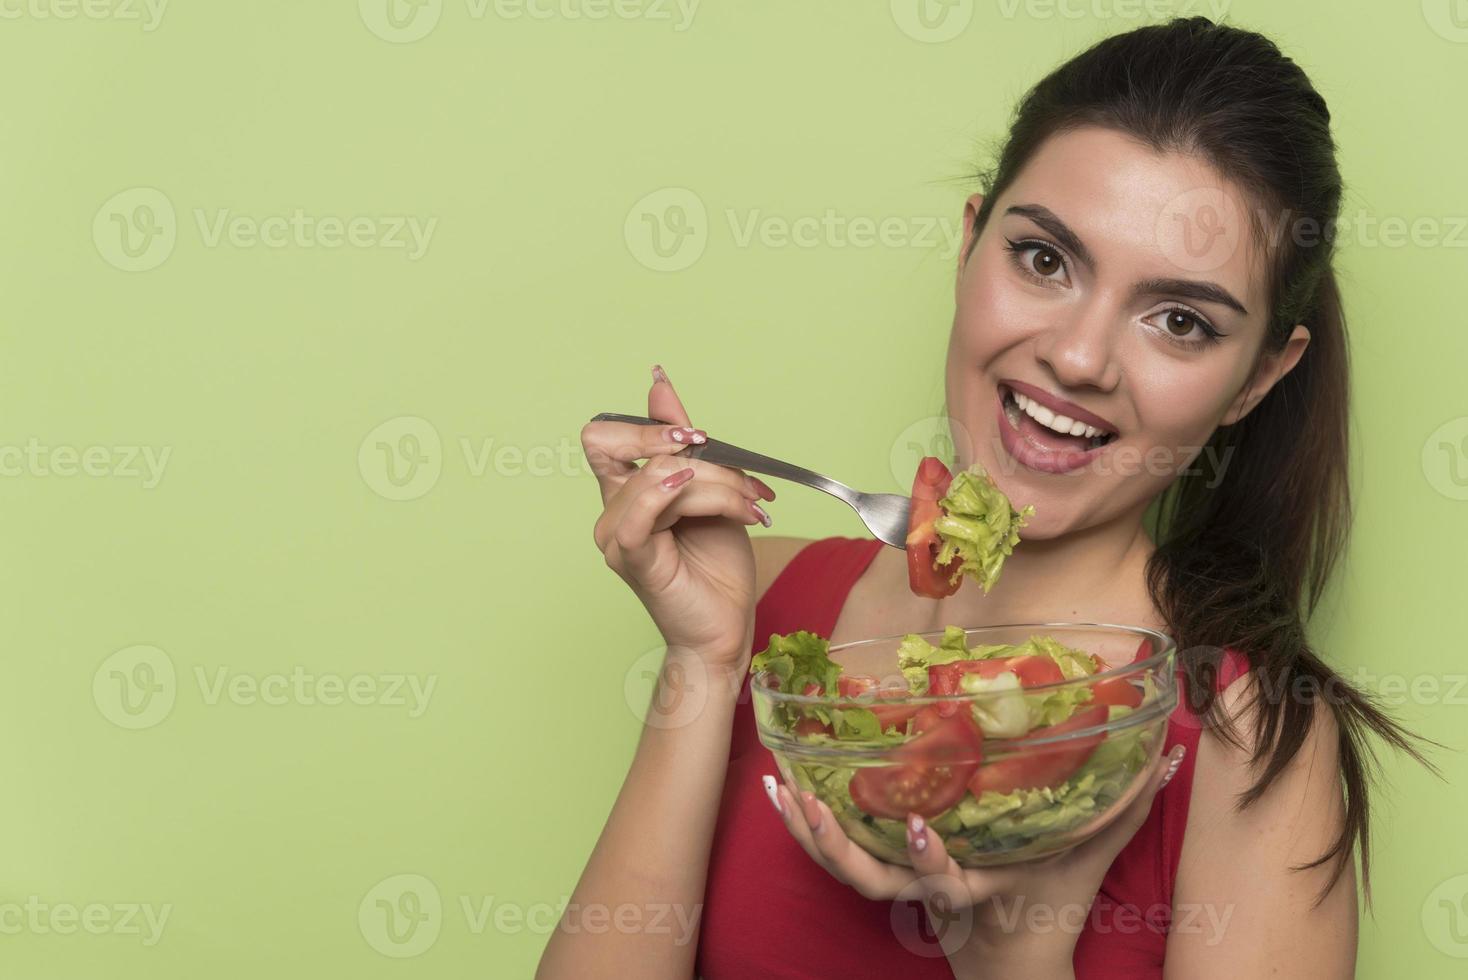 Portrait of a happy playful girl eating fresh salad from a bow photo